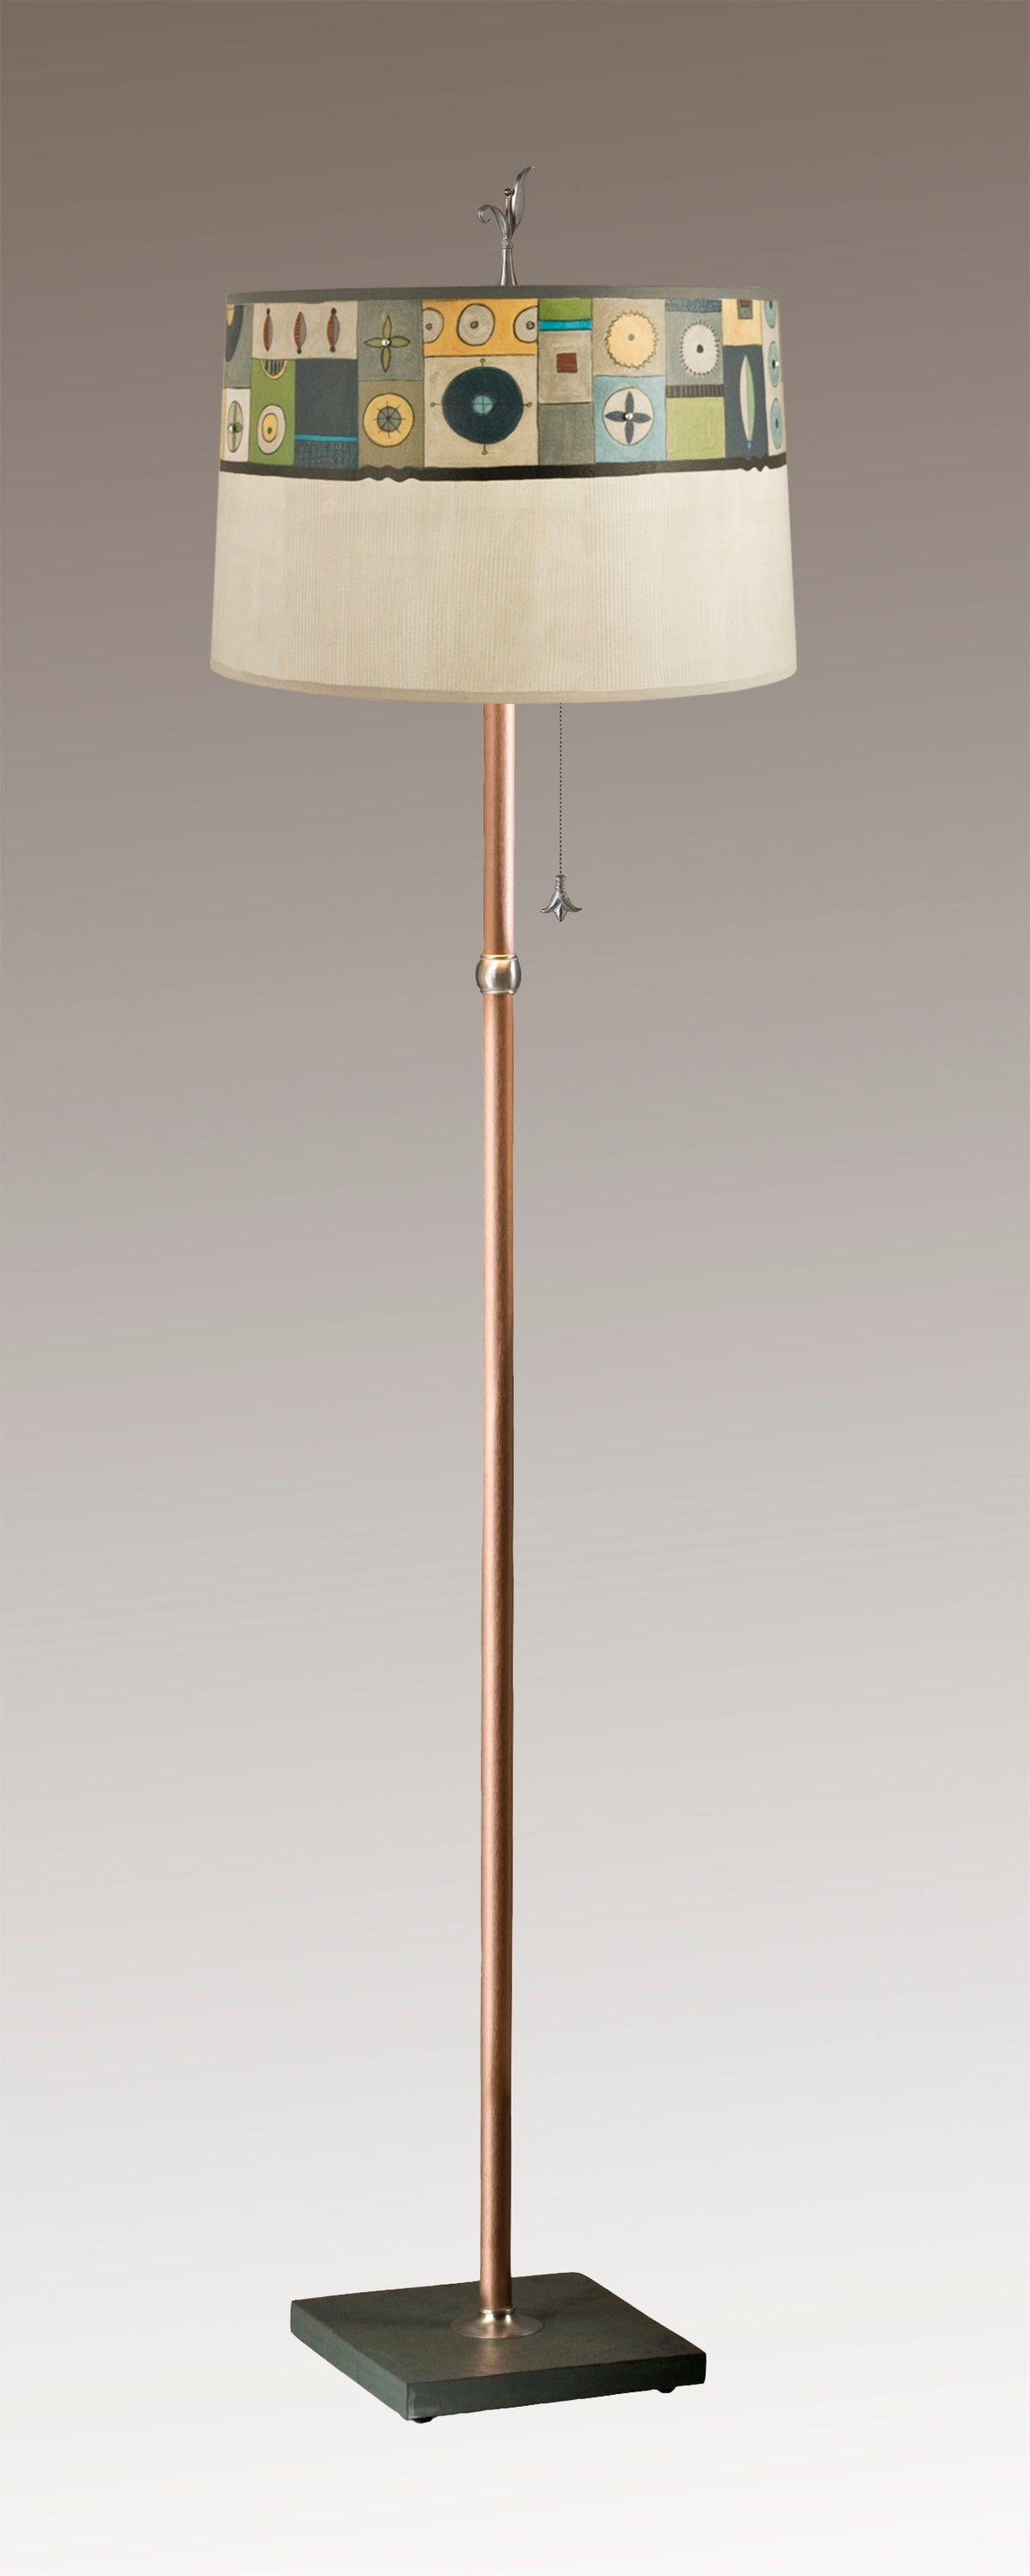 Janna Ugone &amp; Co Floor Lamps Copper Floor Lamp with Large Drum Shade in Lucky Mosaic Oyster